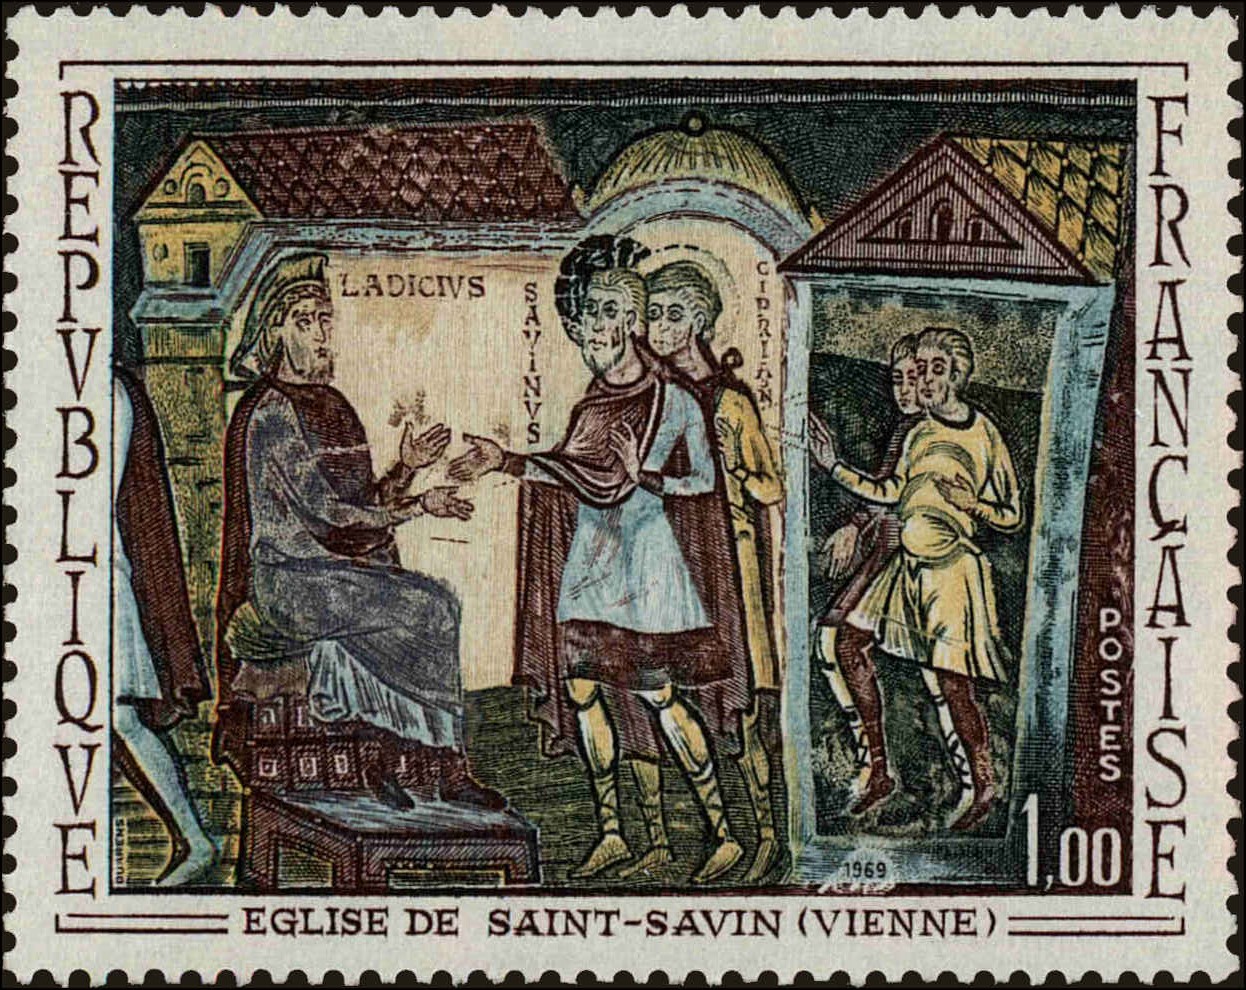 Front view of France 1238 collectors stamp